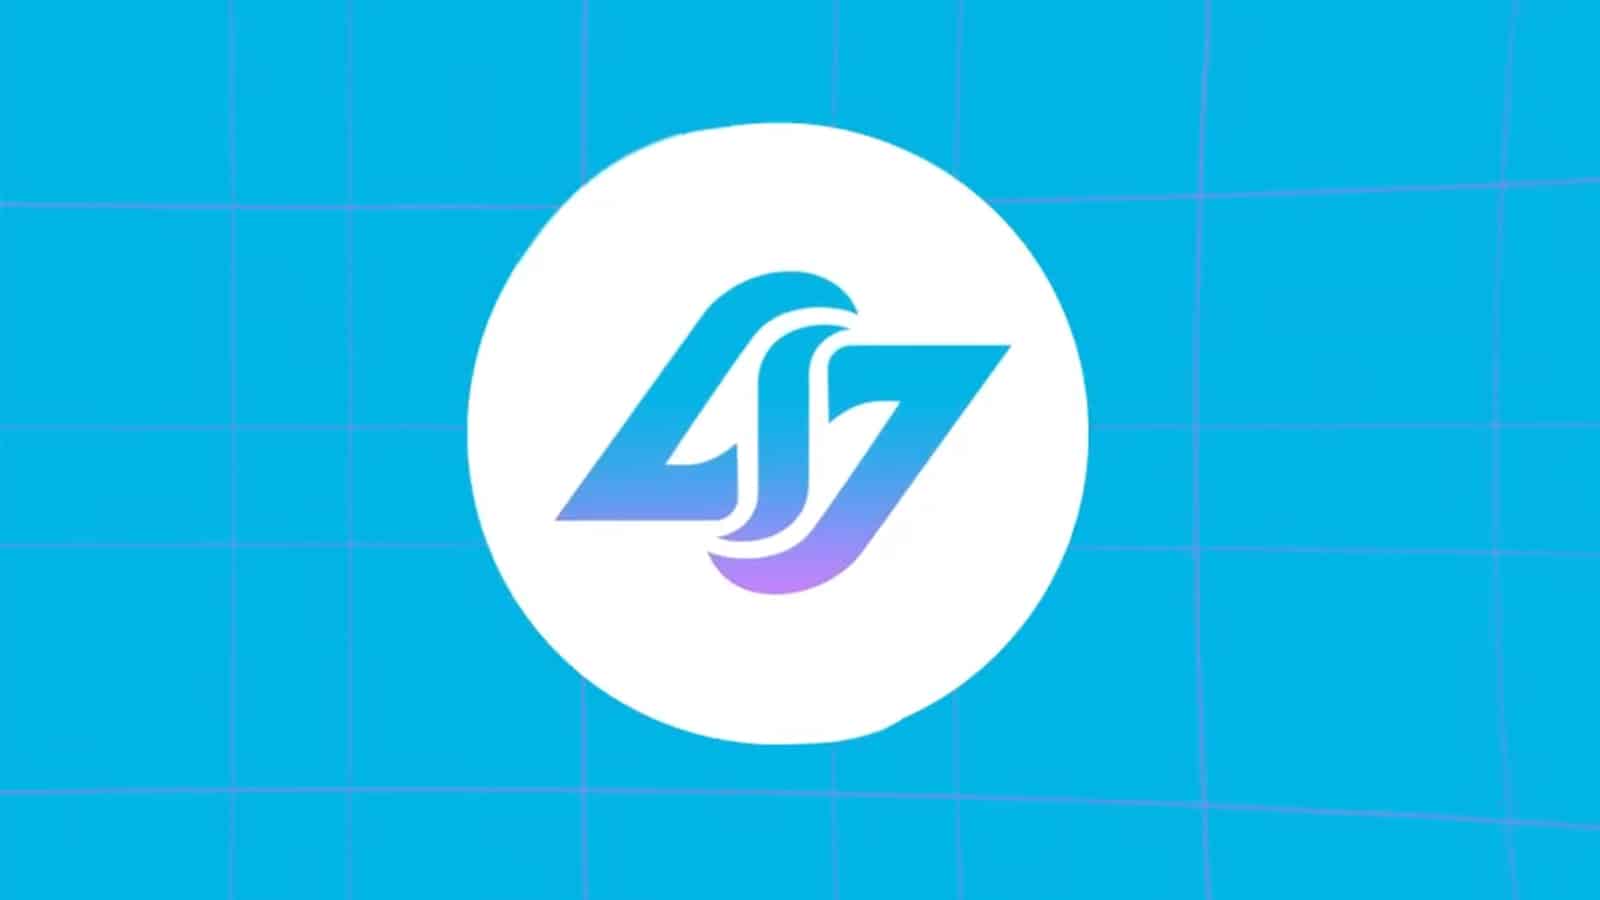 CLG owners confirm imminent changes to esports org – Egaxo